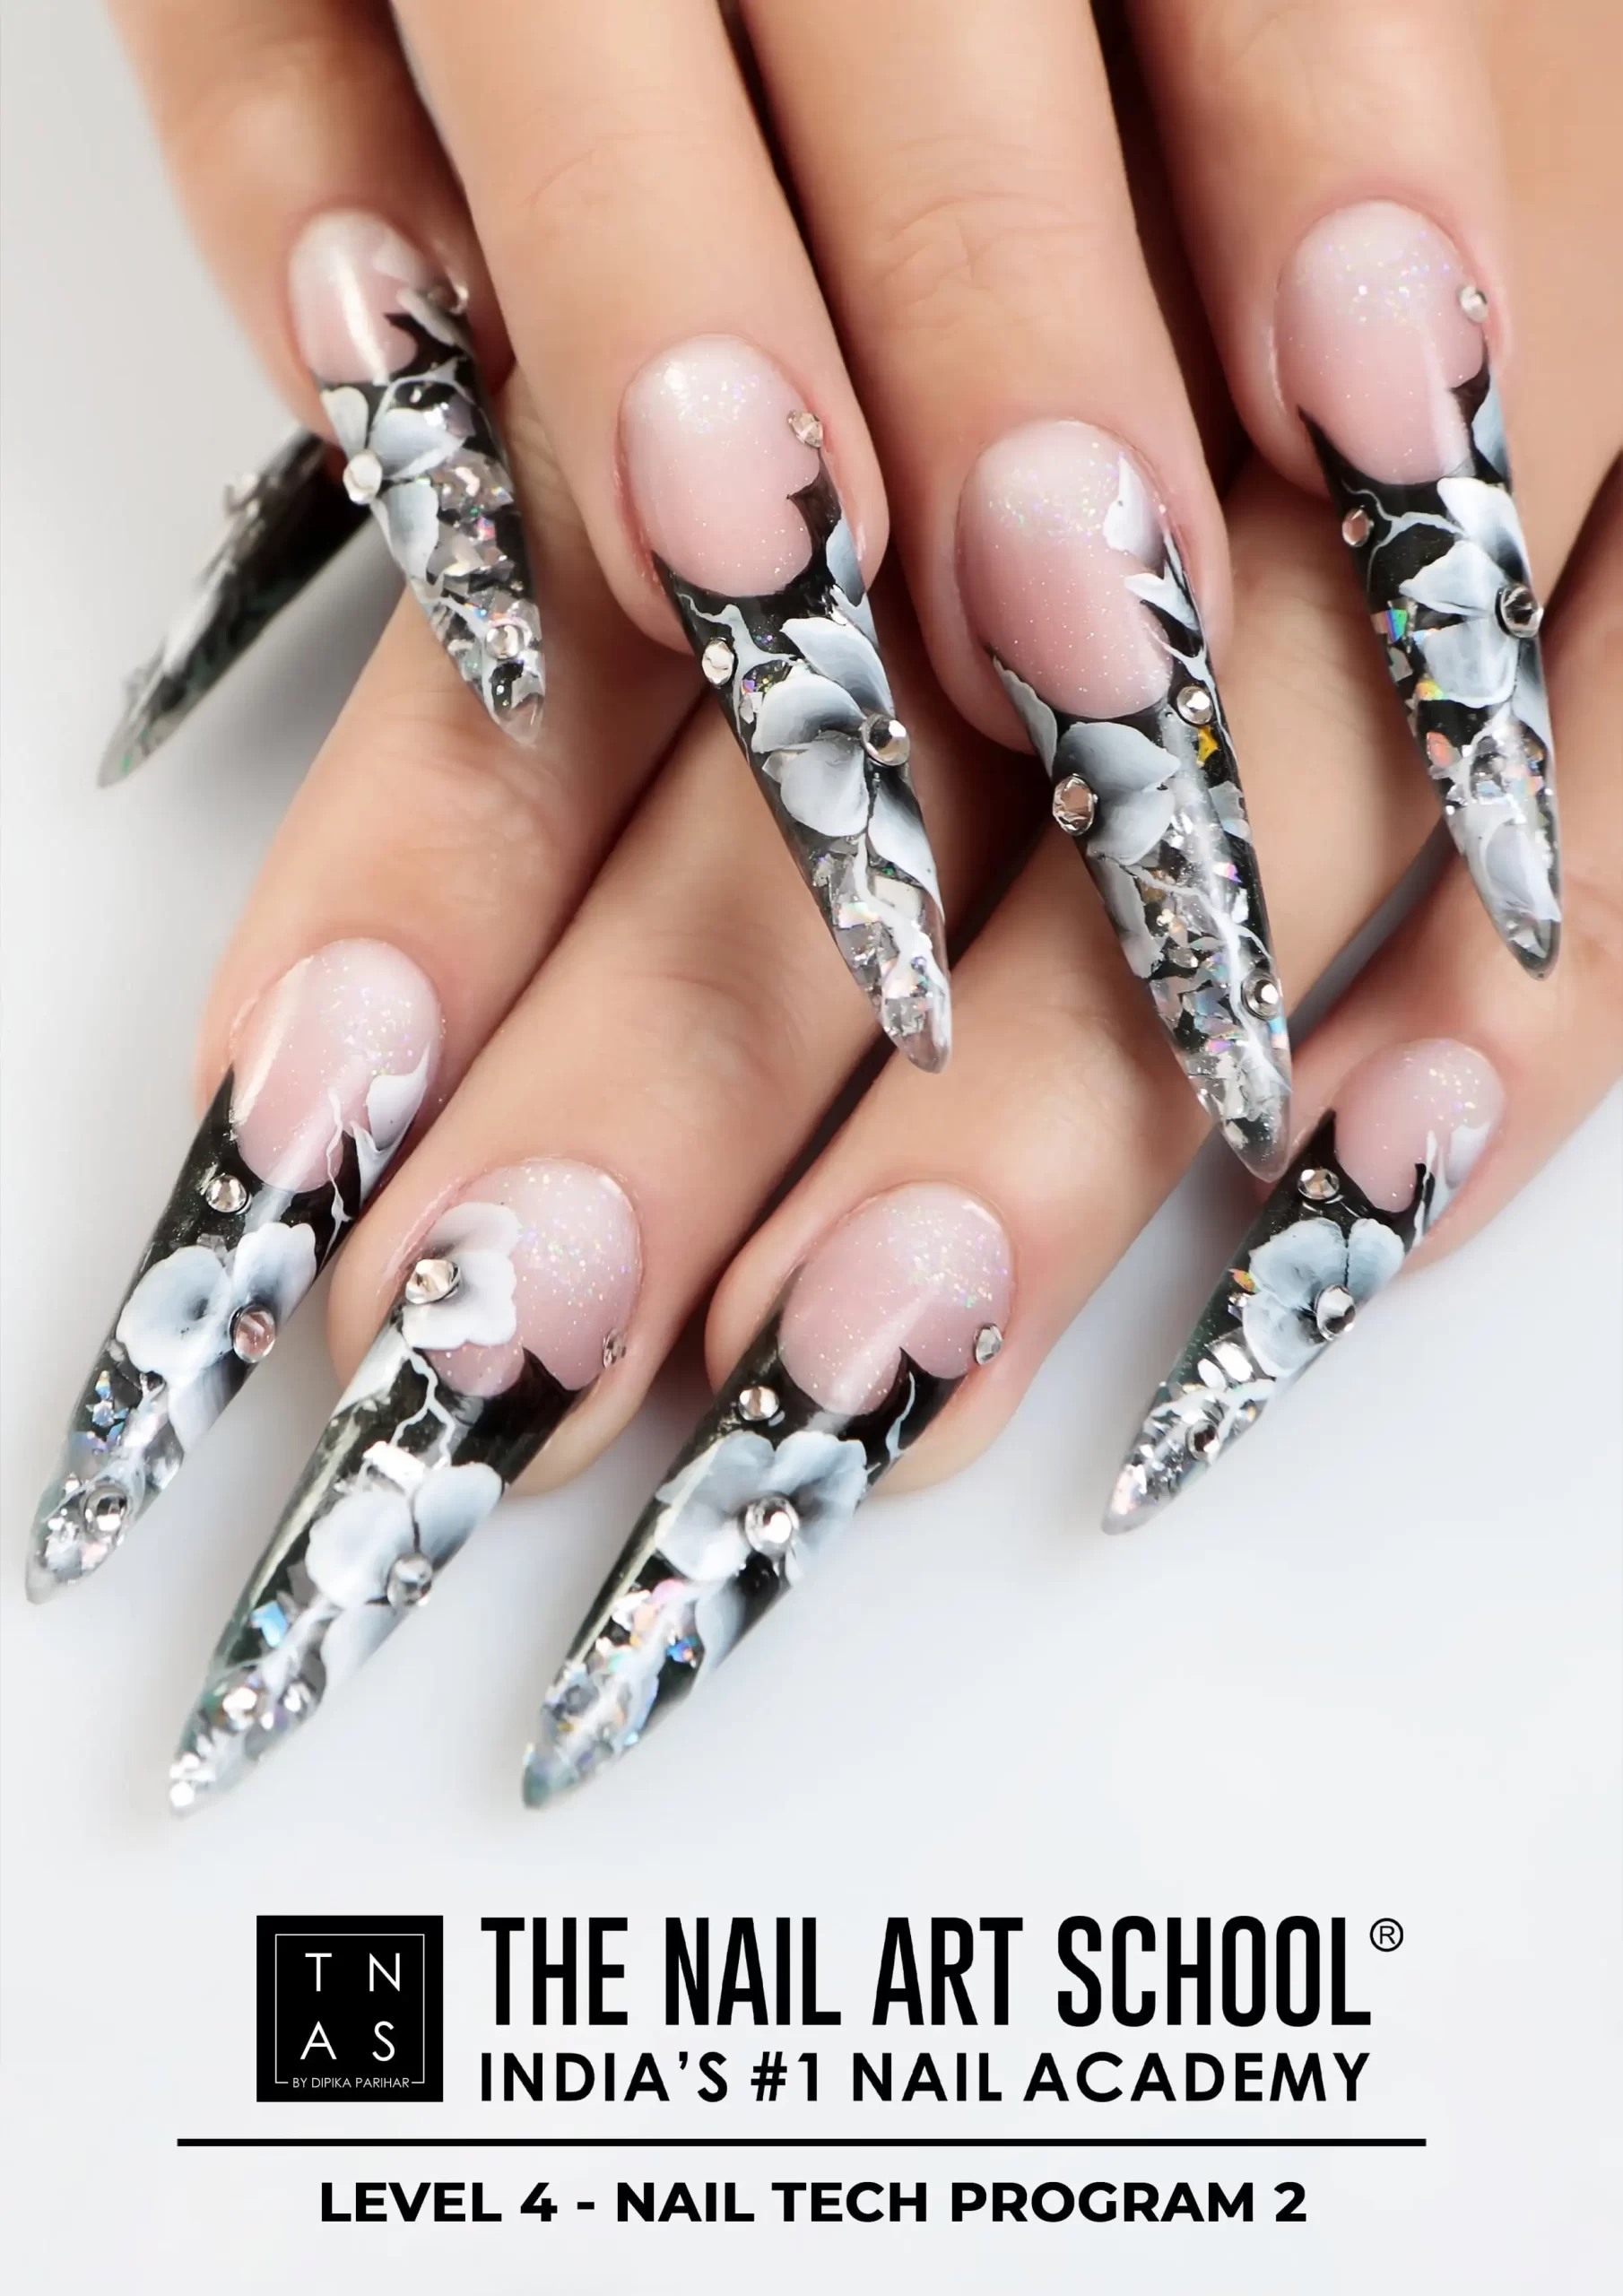 Nails Services - Glam Beauty Salon and Academy